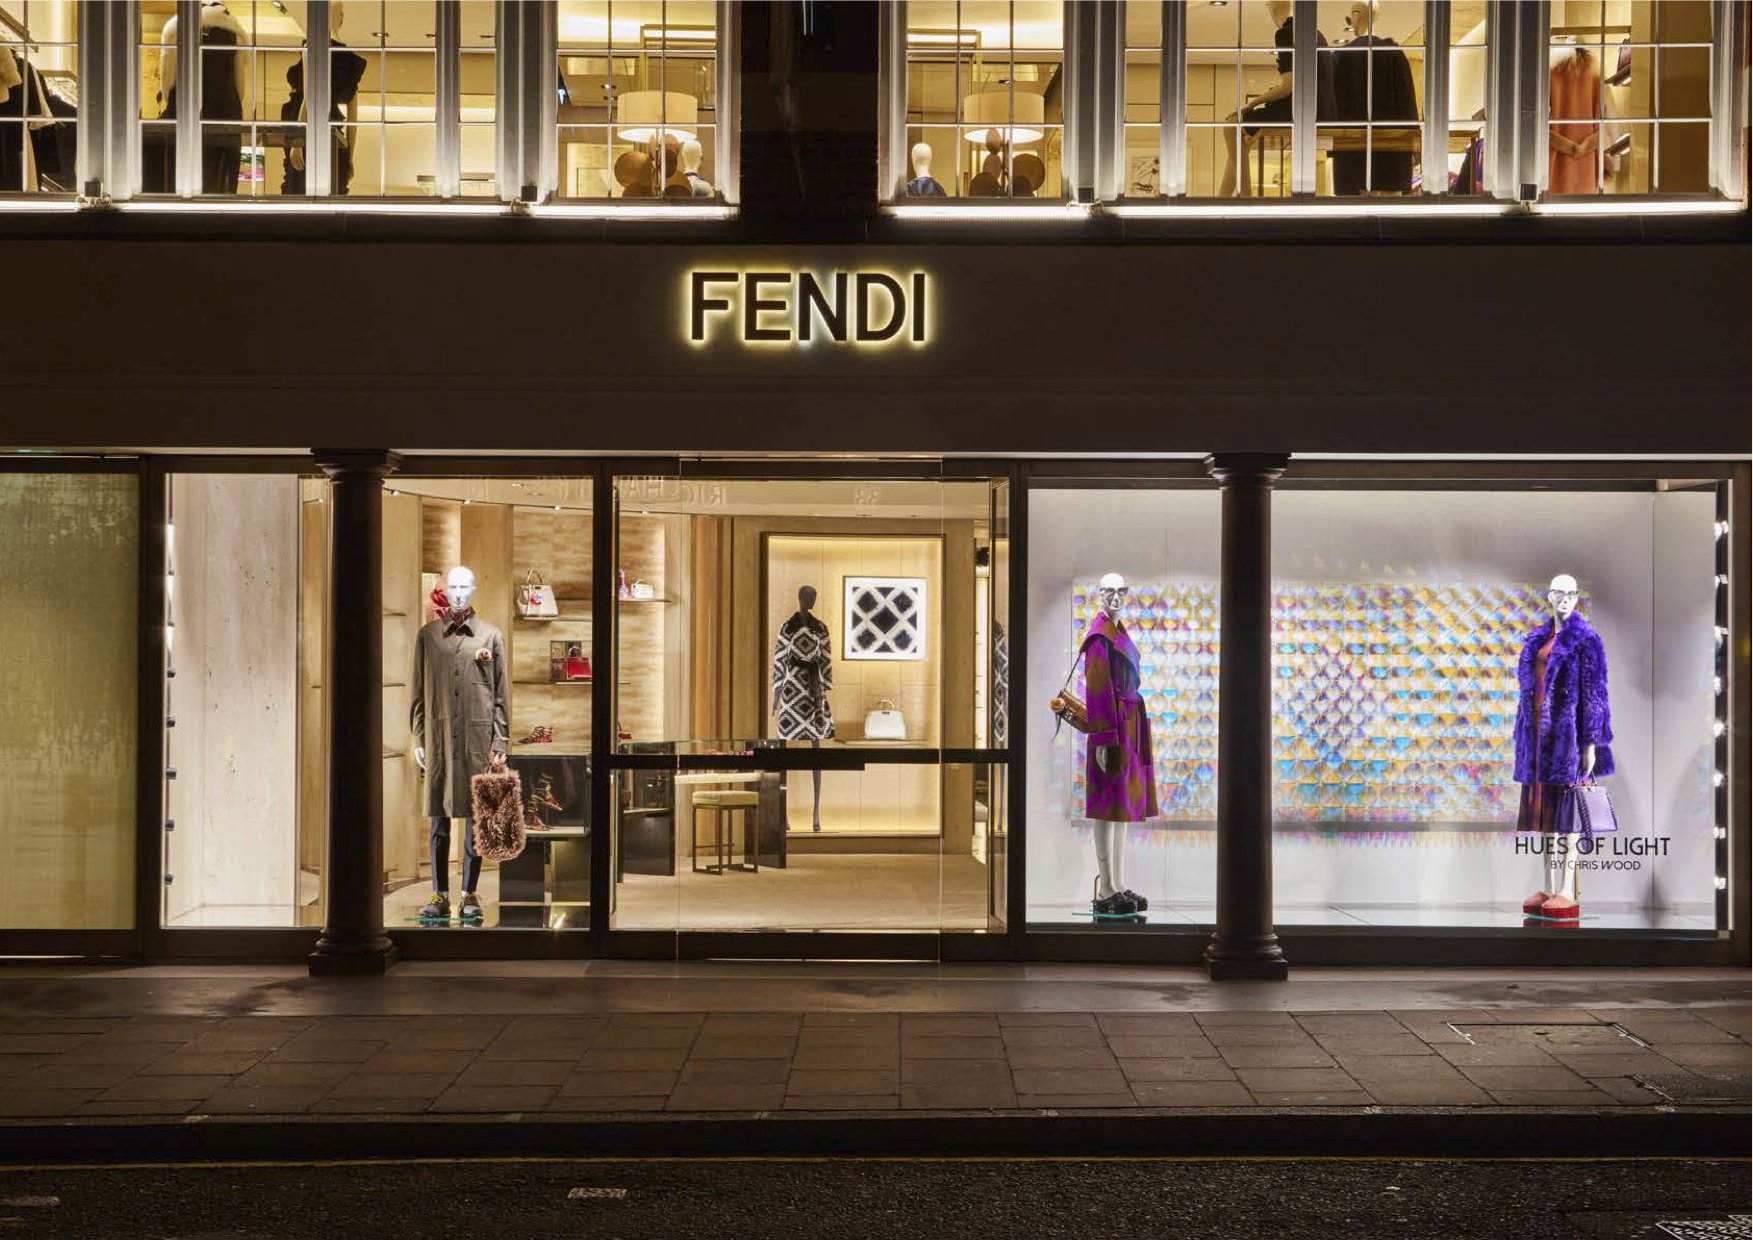 Fendi on Twitter: "The façade of our boutique in London featuring new #HuesofLight window installation by artist #ChrisWood. https://t.co/TE4pAbN0fm" / Twitter